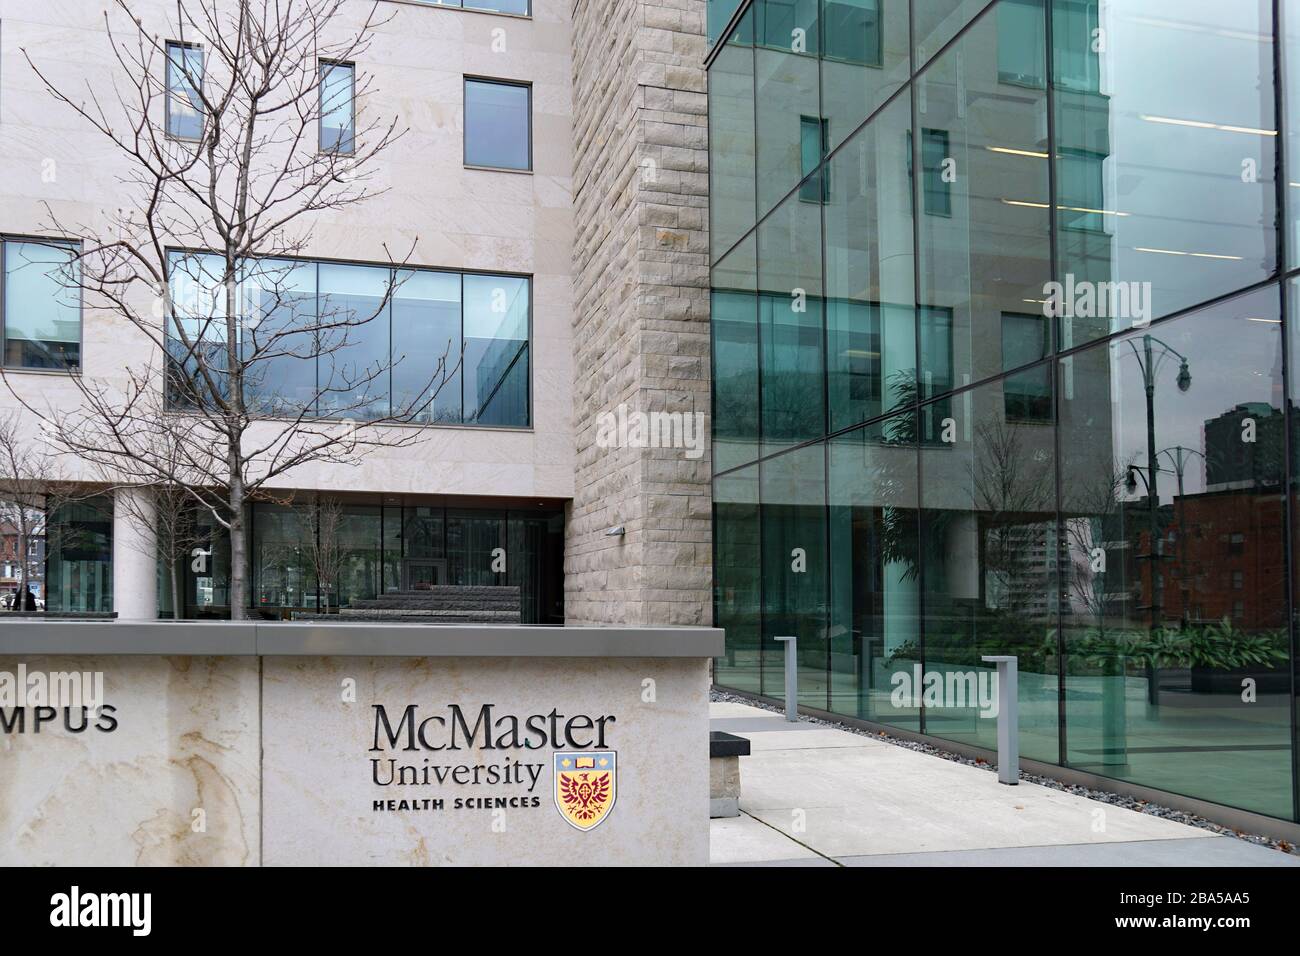 Mcmaster University High Resolution Stock Photography and Images - Alamy